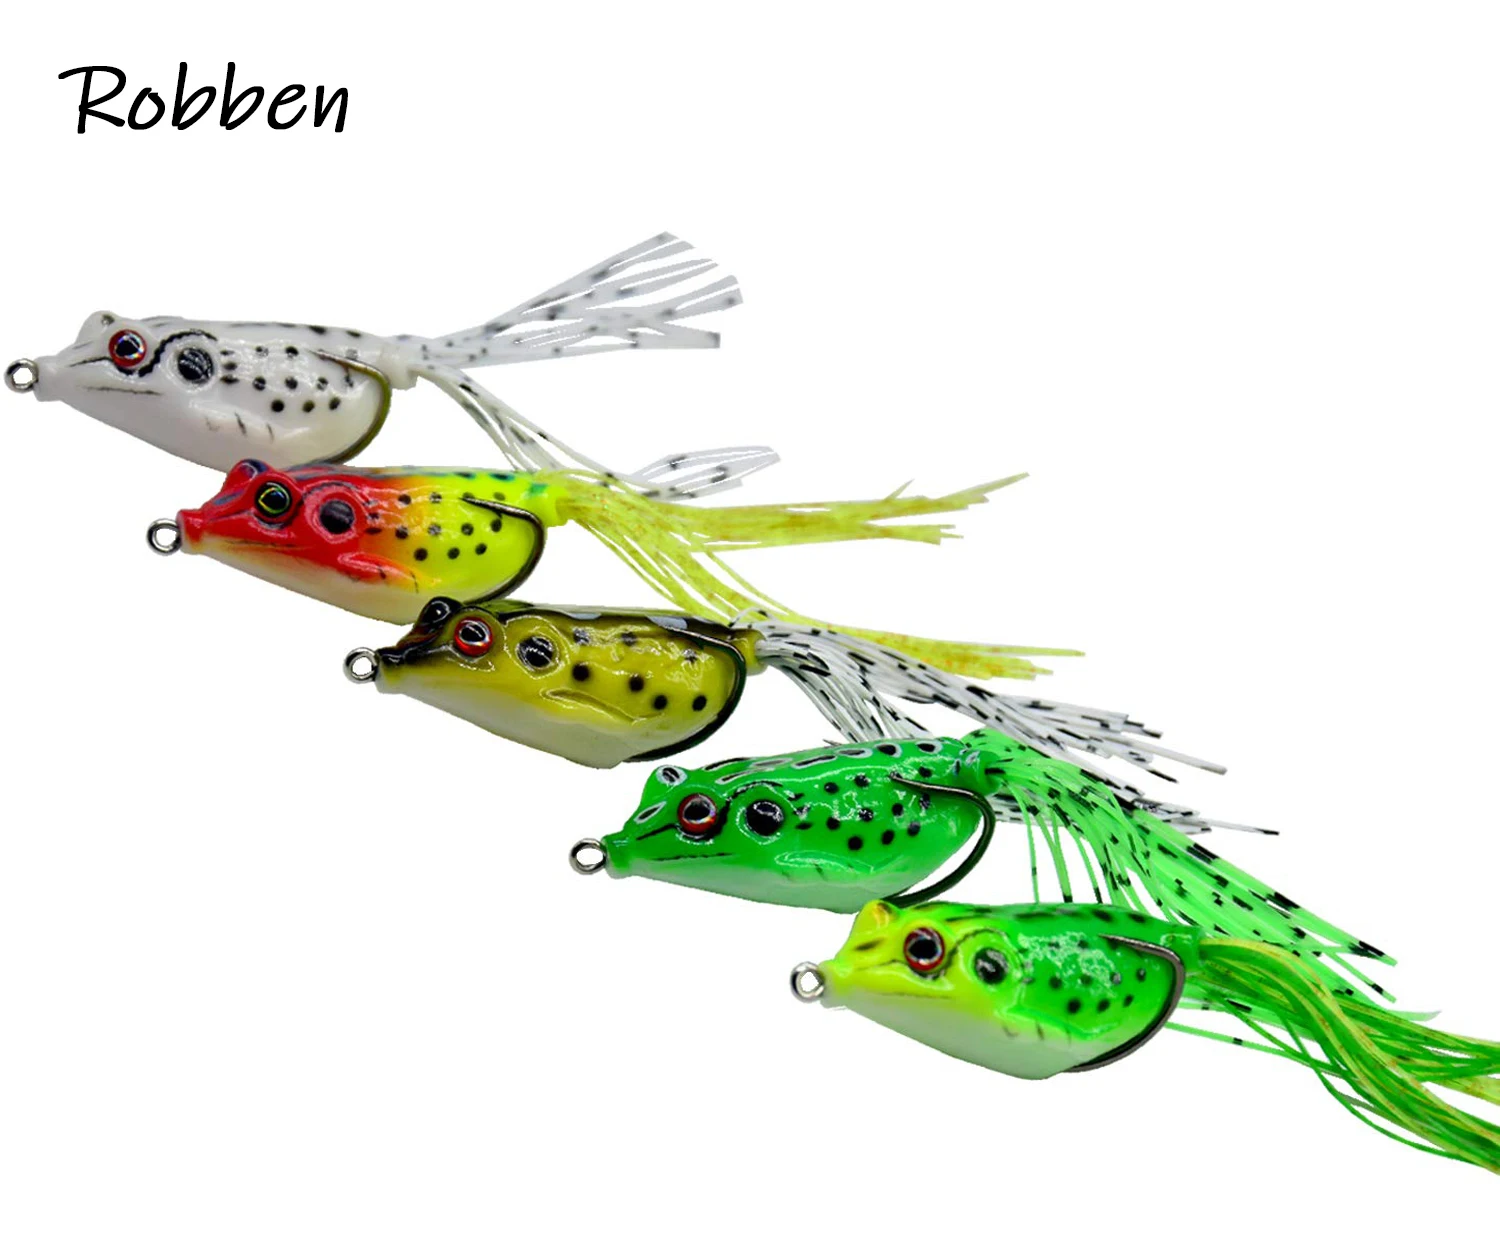 

Robben 5g-15g Soft Bait Japan Plastic Frog Soft Fishing Lures double Hooks Topwater Ray Frog 4CM-6CM Artificial Soft Bait, 15 colors